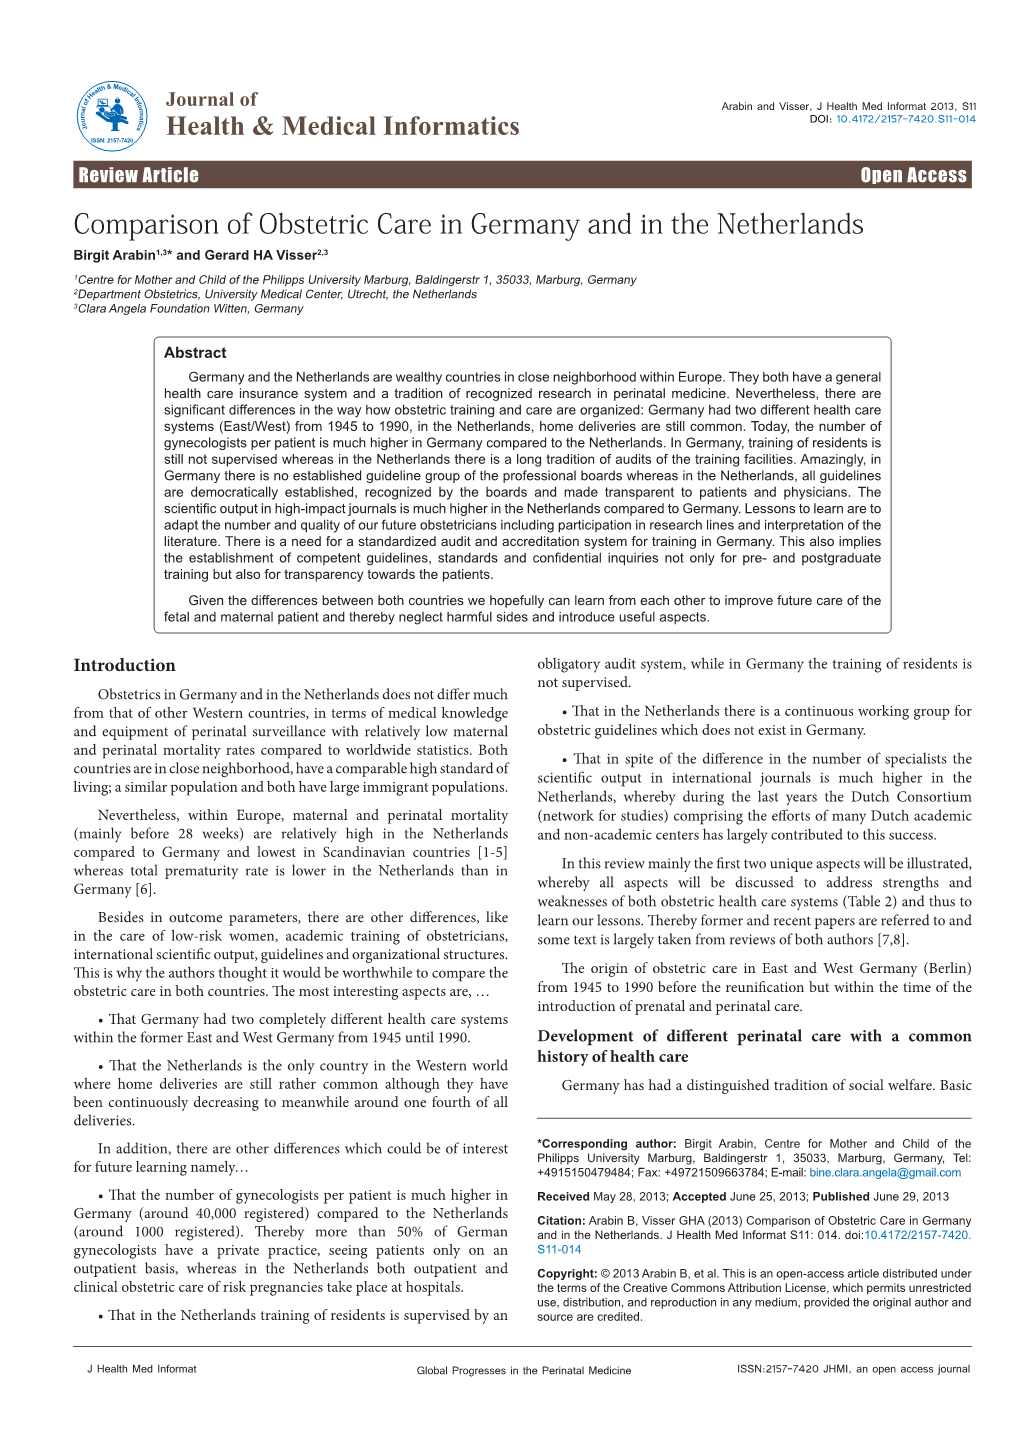 Comparison of Obstetric Care in Germany and in the Netherlands